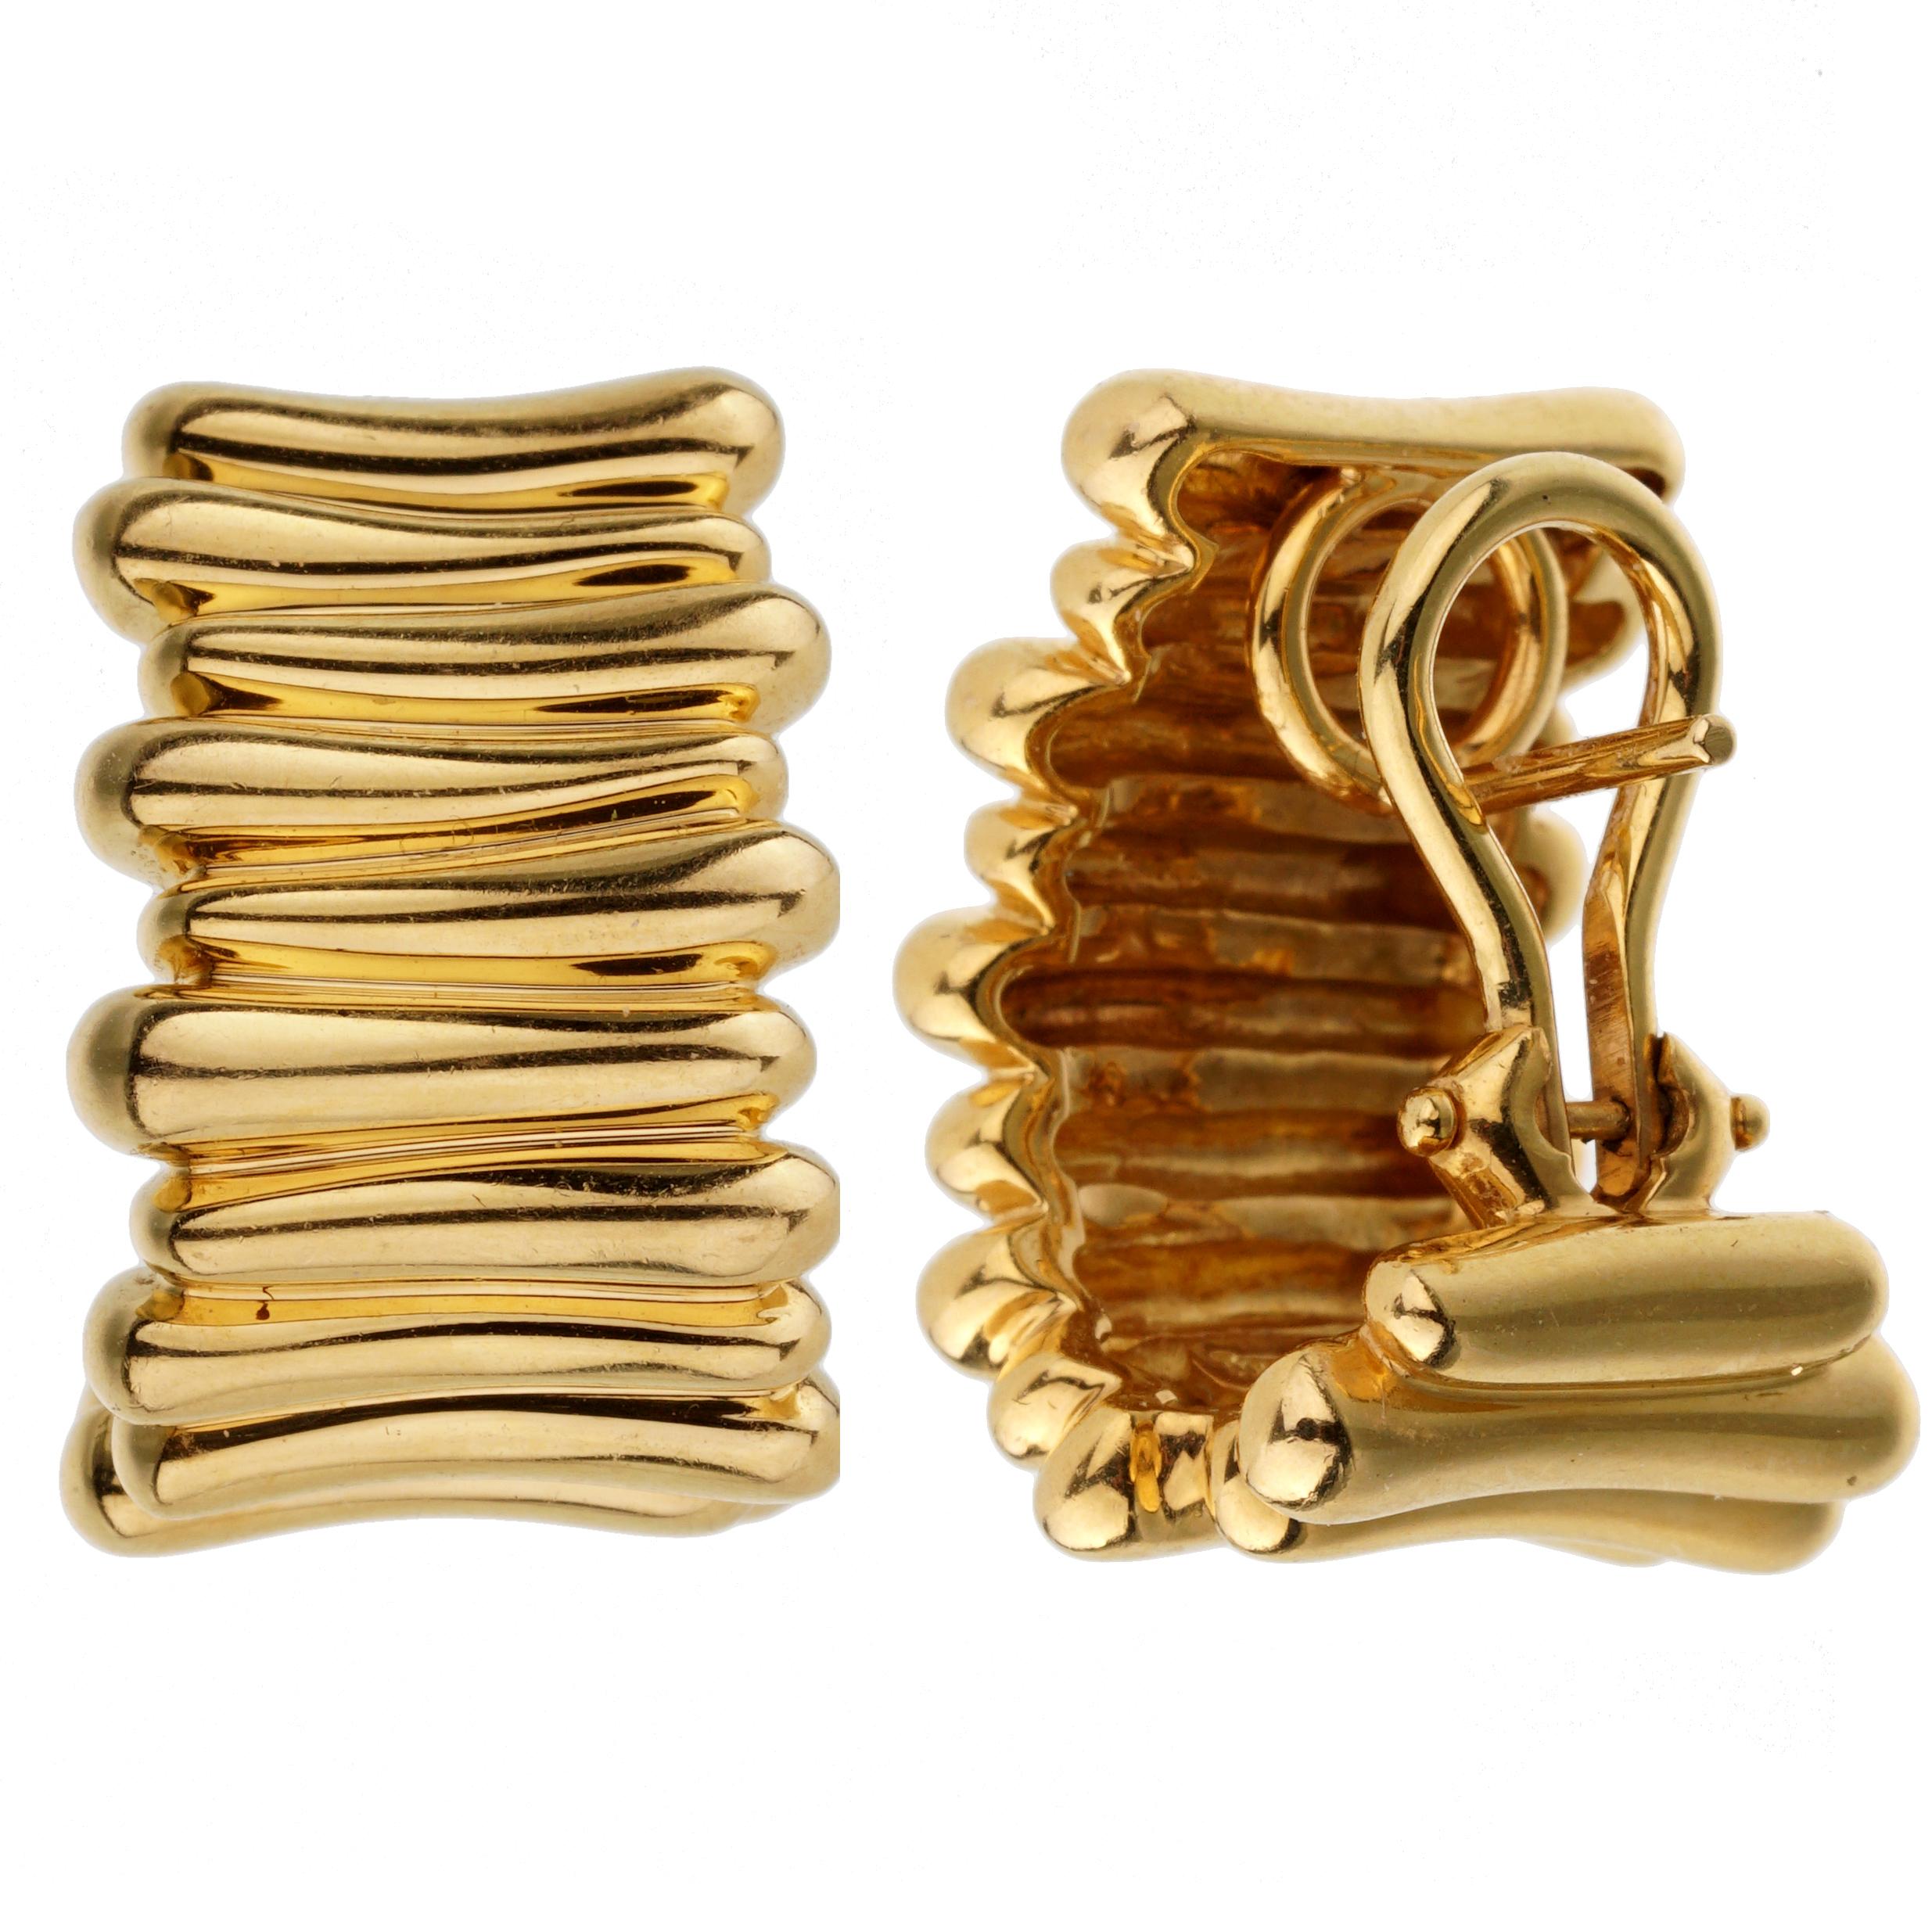 An intriguing set of Tiffany & Co earrings showcasing an overlapping yellow gold design. The earrings have a length of .78